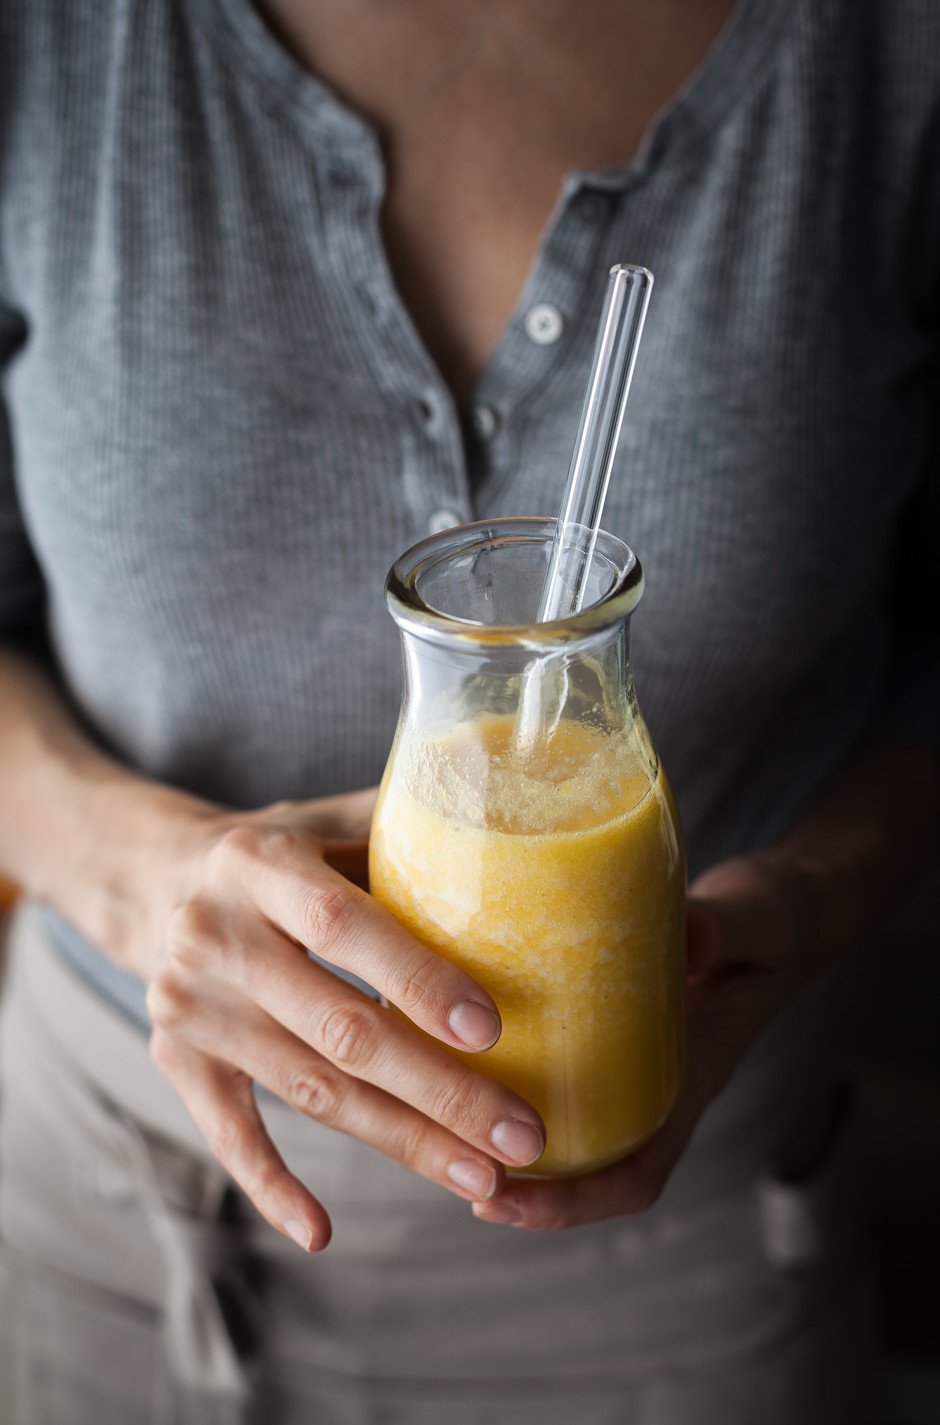 a close up of a person wearing a grey shirt holding a glass jar of citrus ginger juice with a glass straw in it.